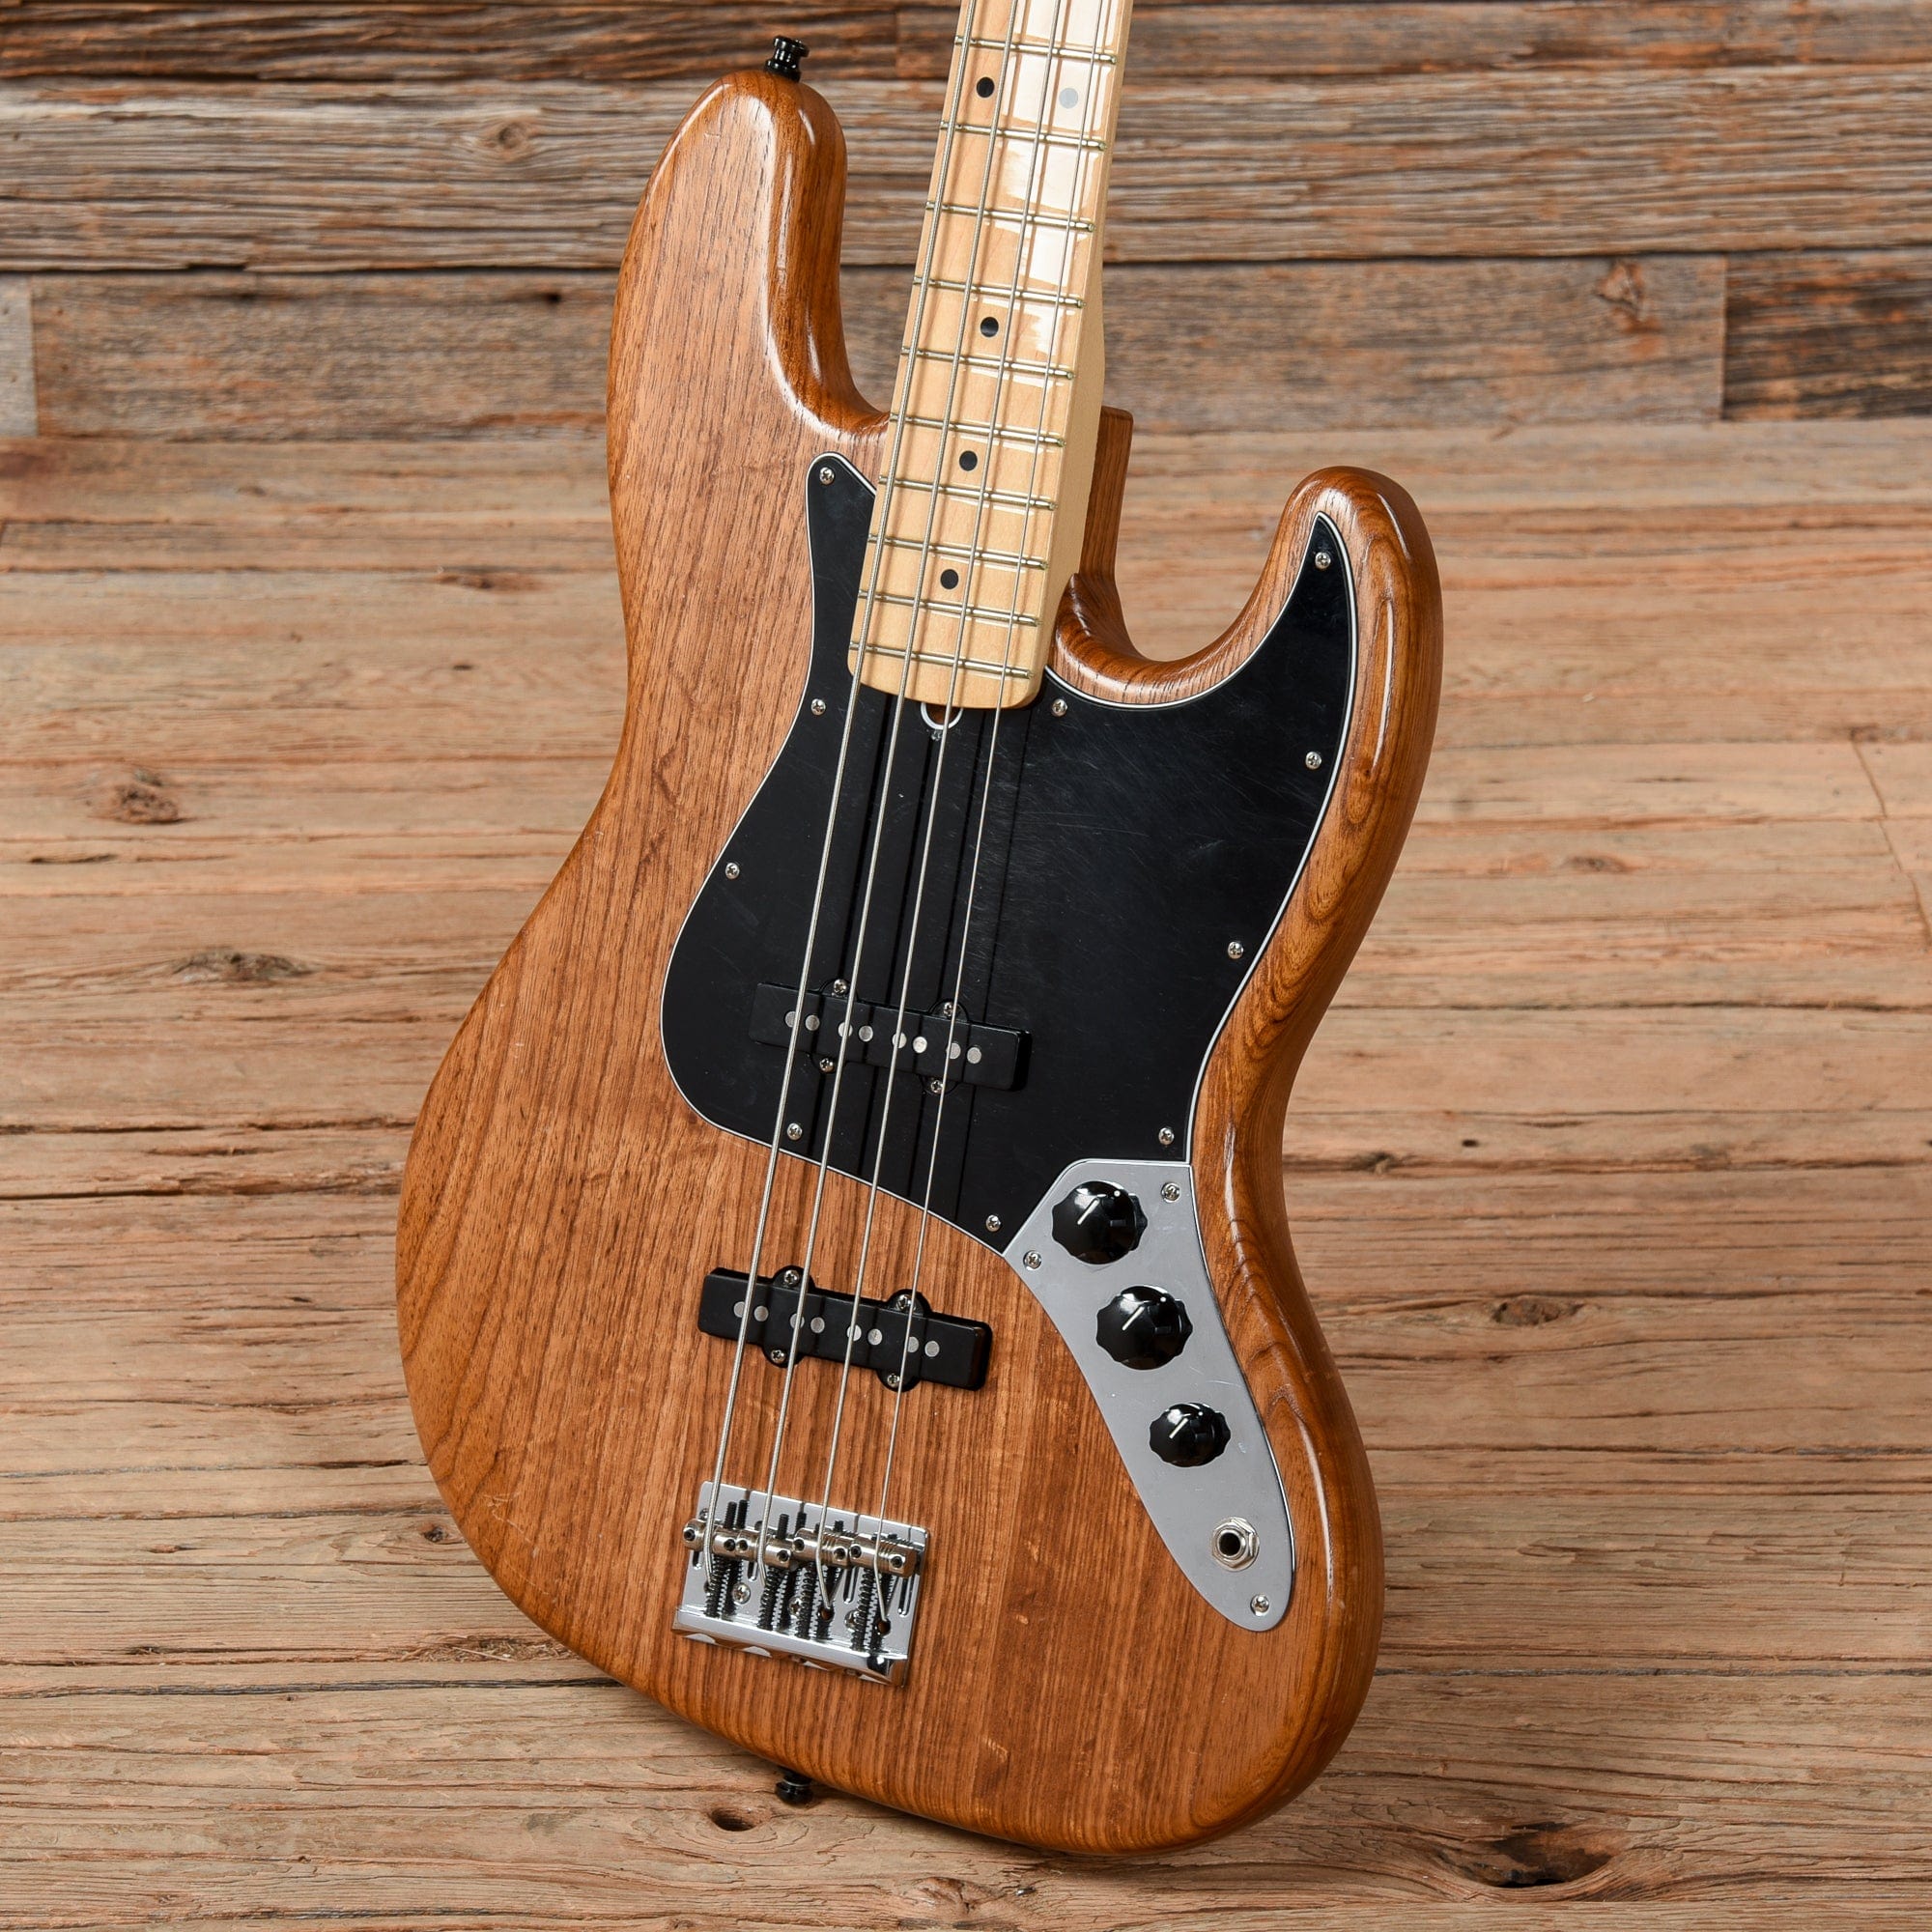 Fender Limited Edition Roasted Ash American Professional Jazz Bass Natural 2018 Bass Guitars / 4-String